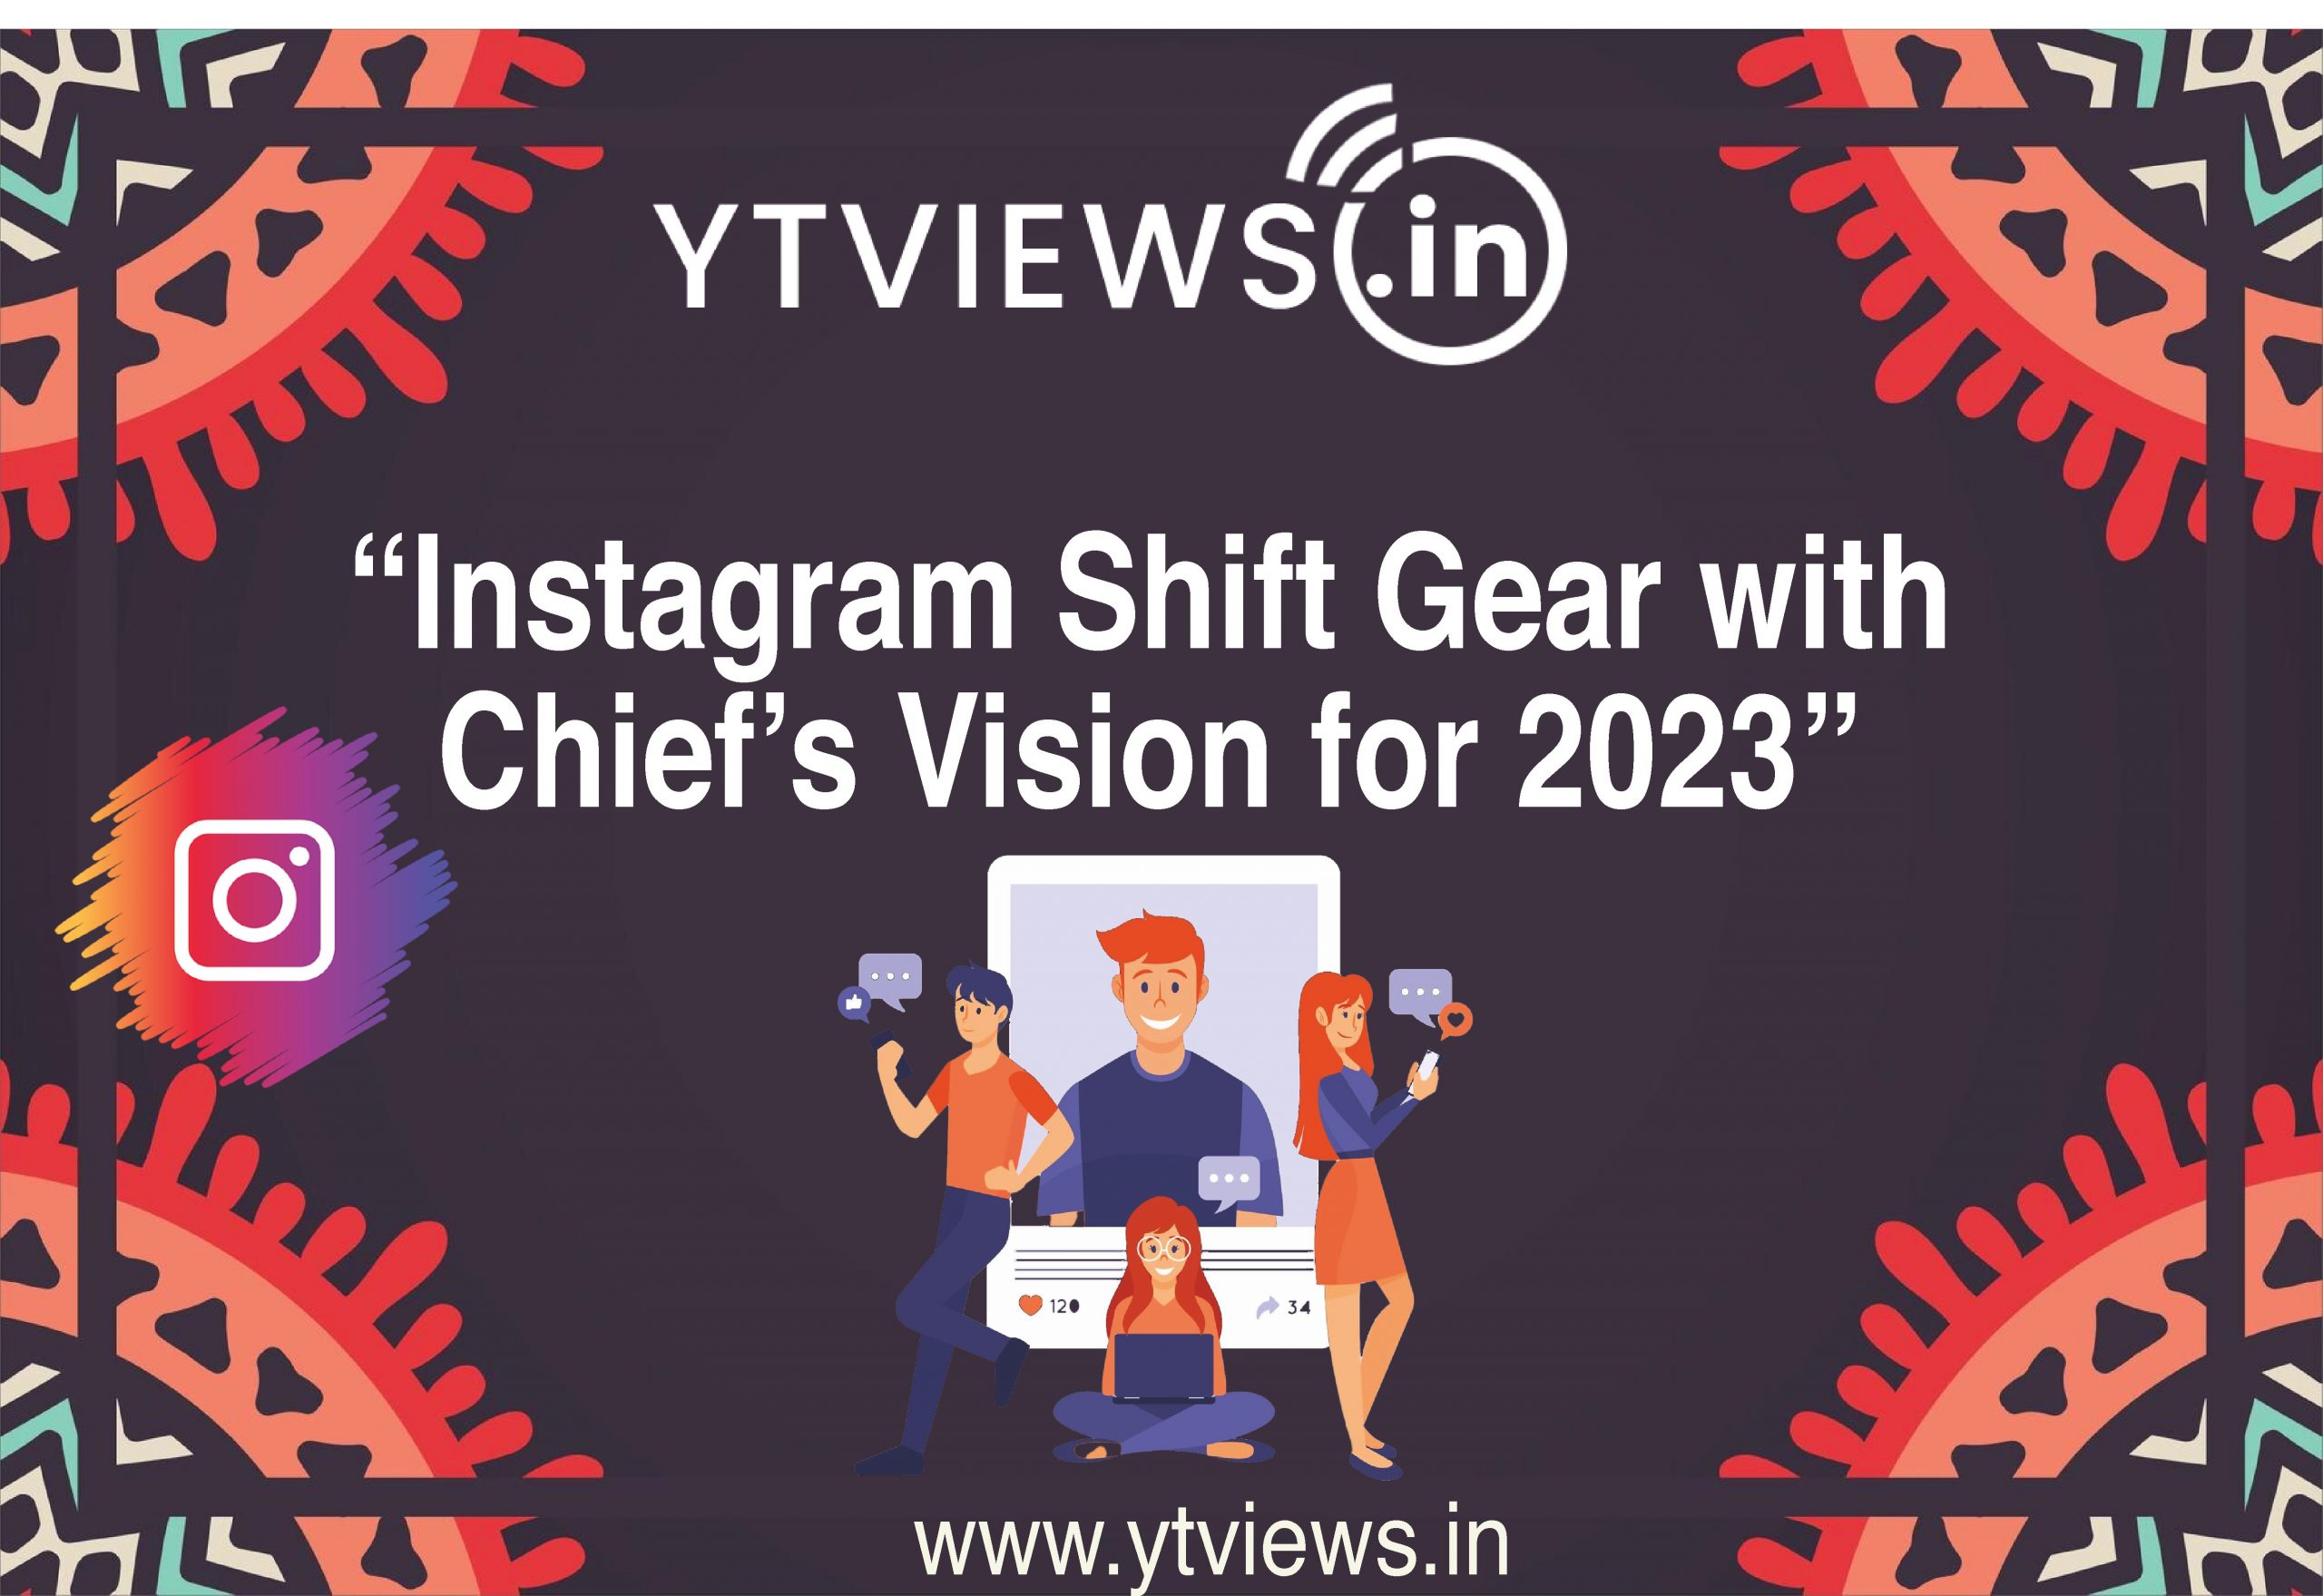 Instagram Shifts Gears with Chief’s Vision for 2023